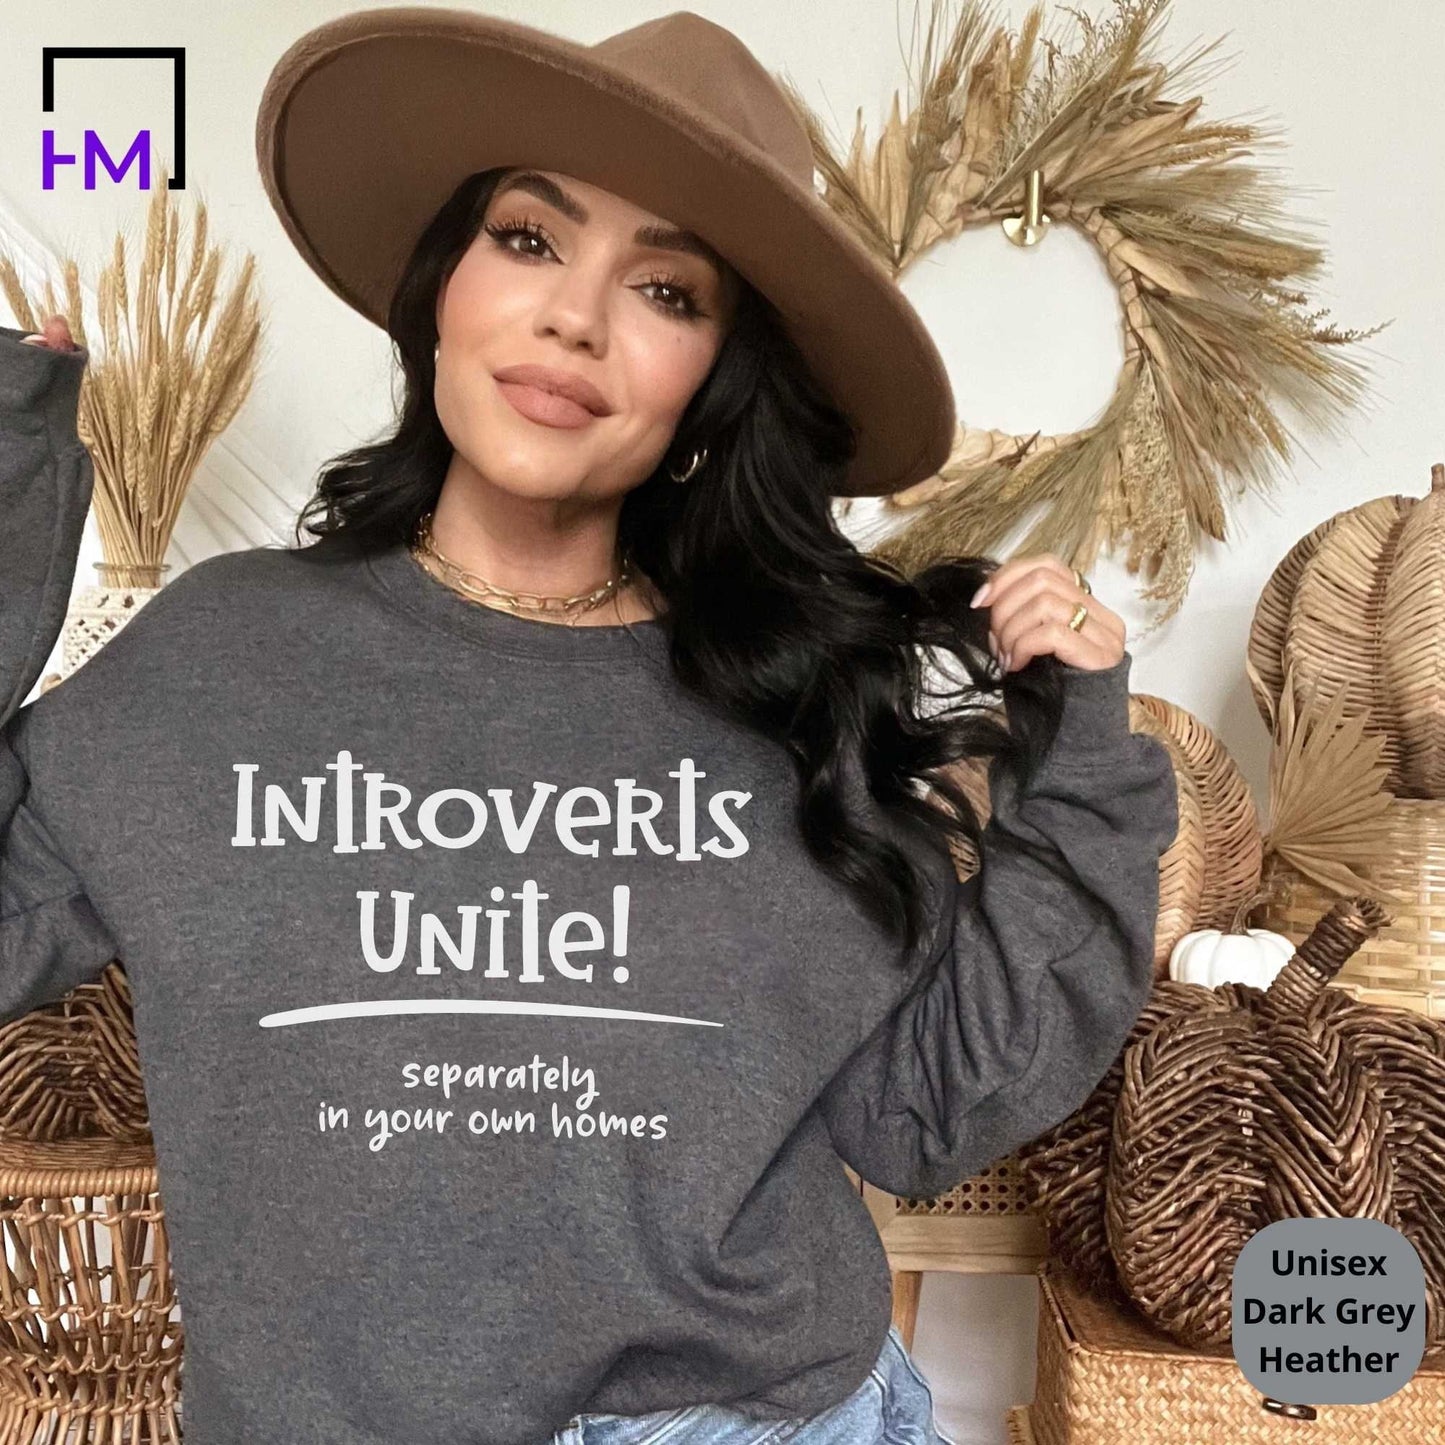 Introvert Shirt, Gift for Introvert, Introverts Unite Shirt, Funny Shirts for Women and Men, Indoorsy Shirt, Antisocial Shirt, Humor Shirt HMDesignStudioUS